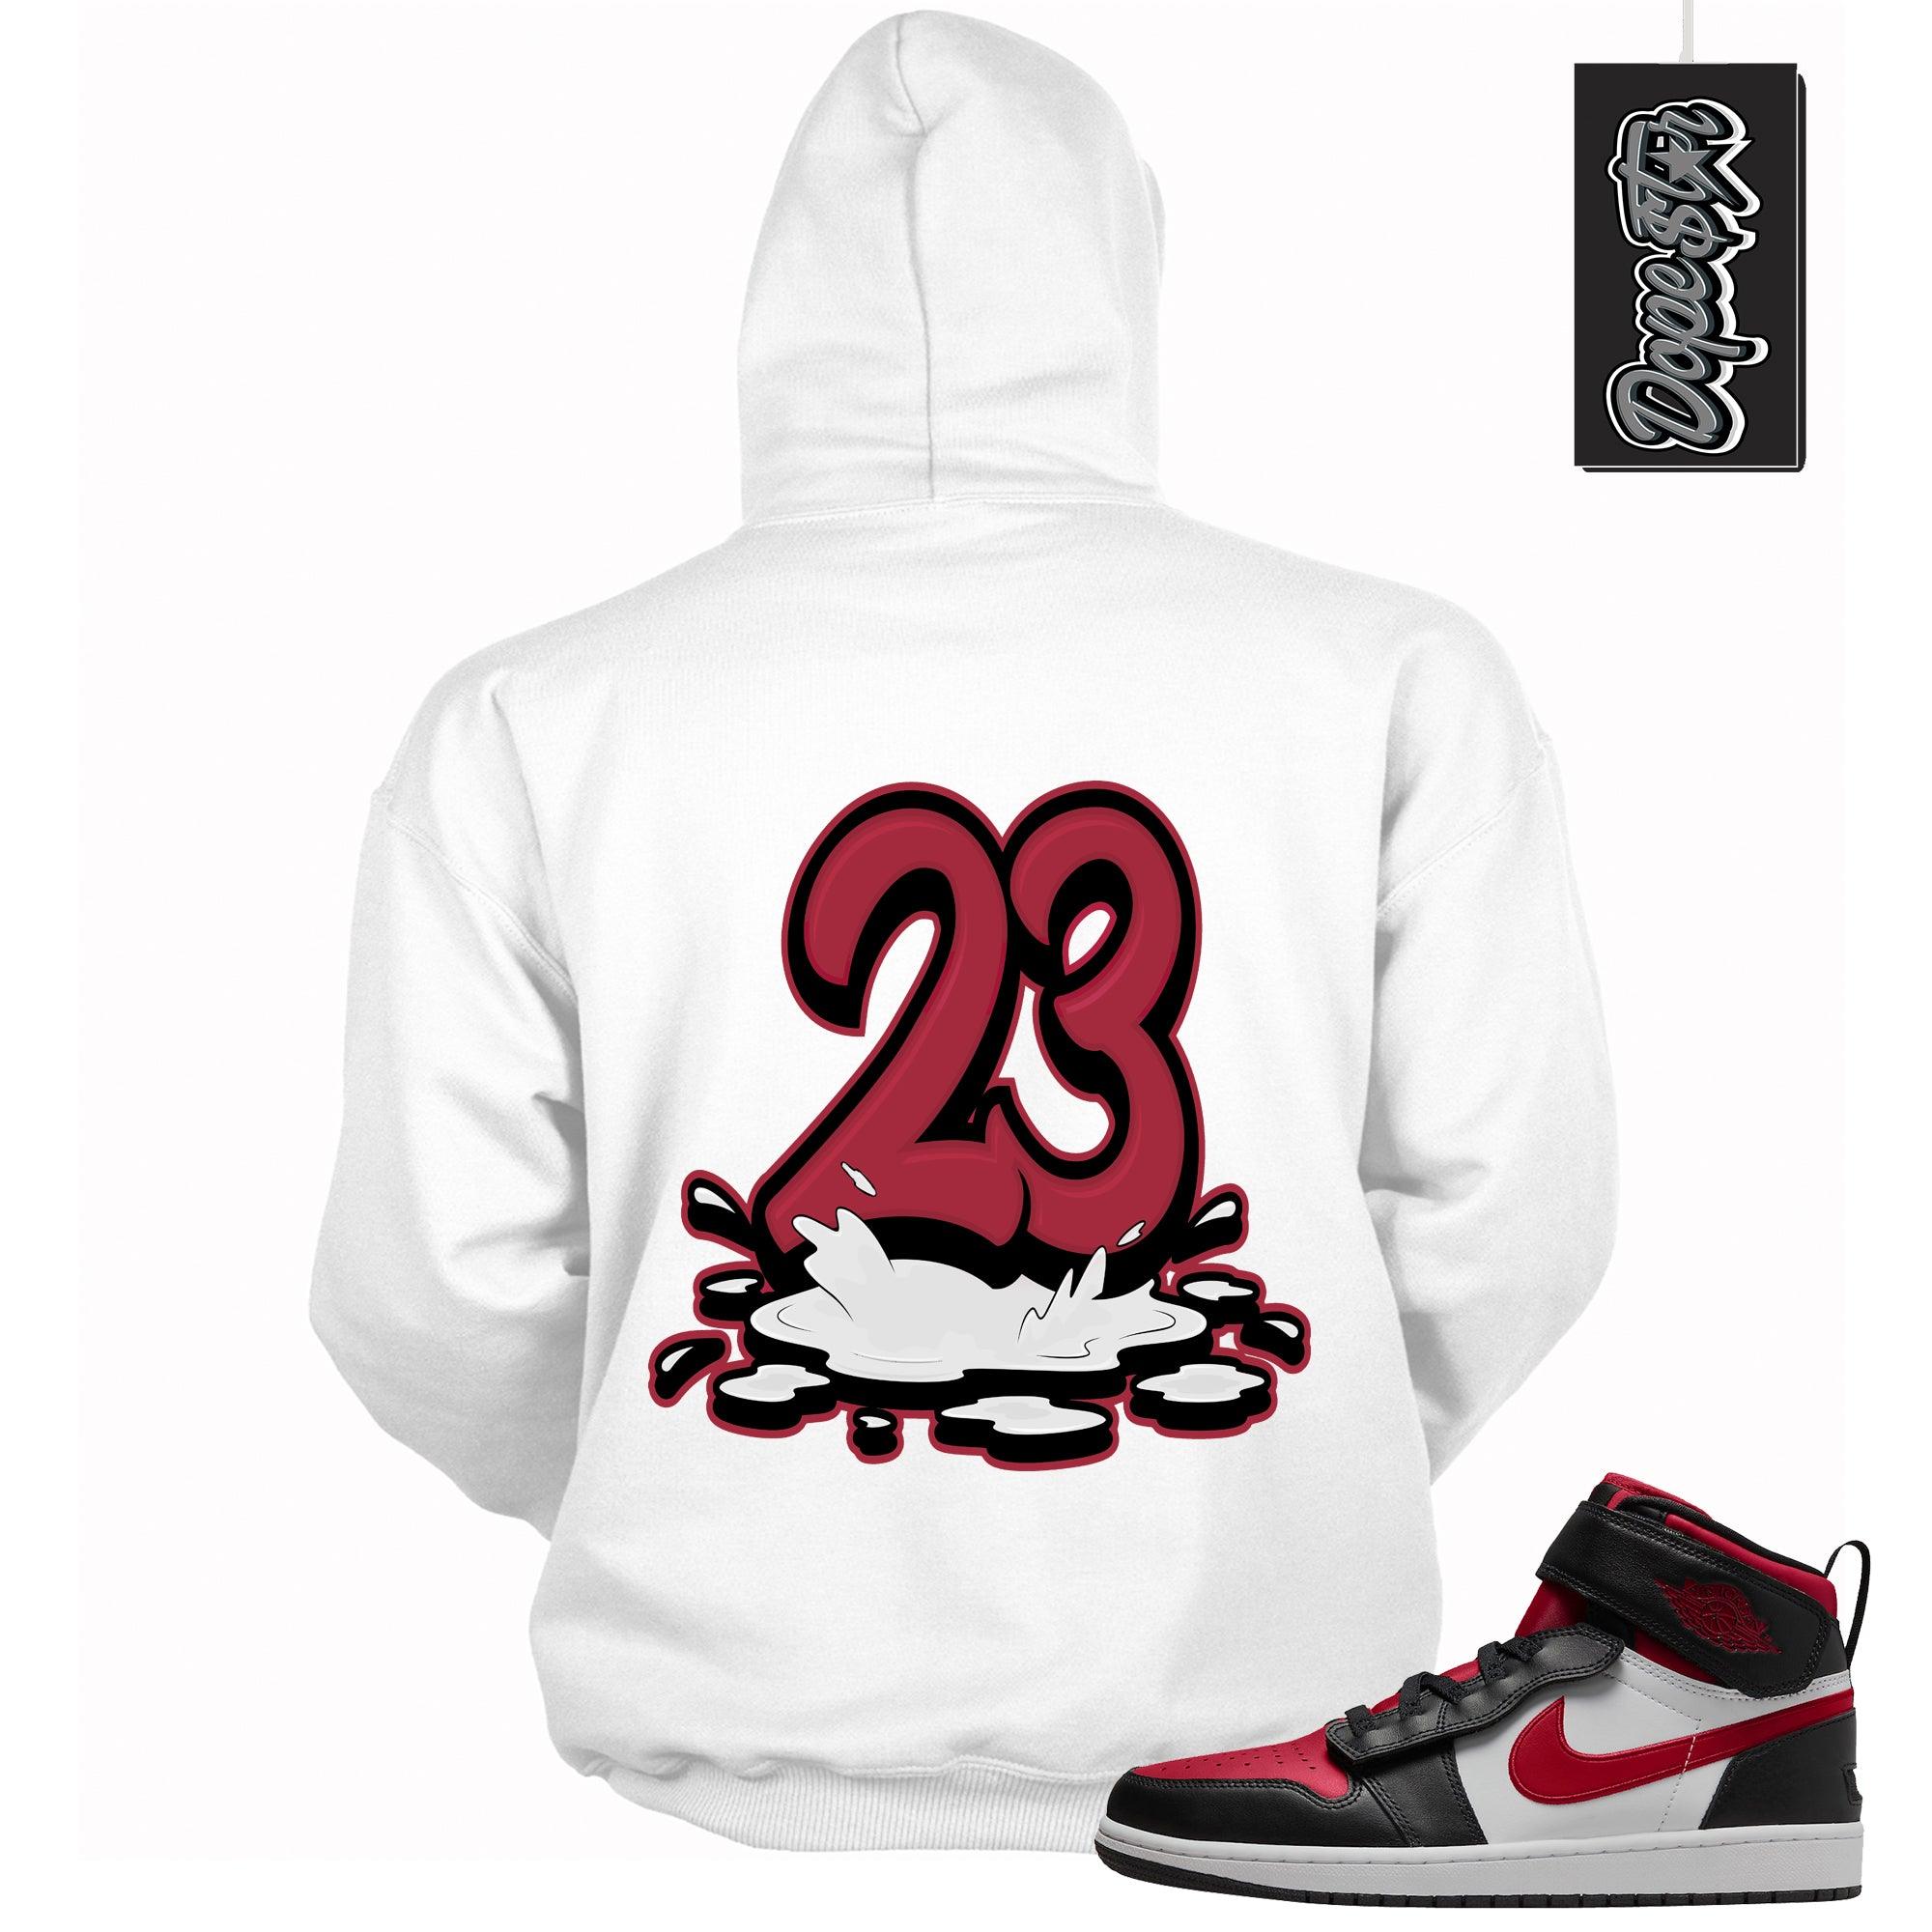 23 Melting Hoodie AJ 1 High FlyEase Black White Fire Red photo